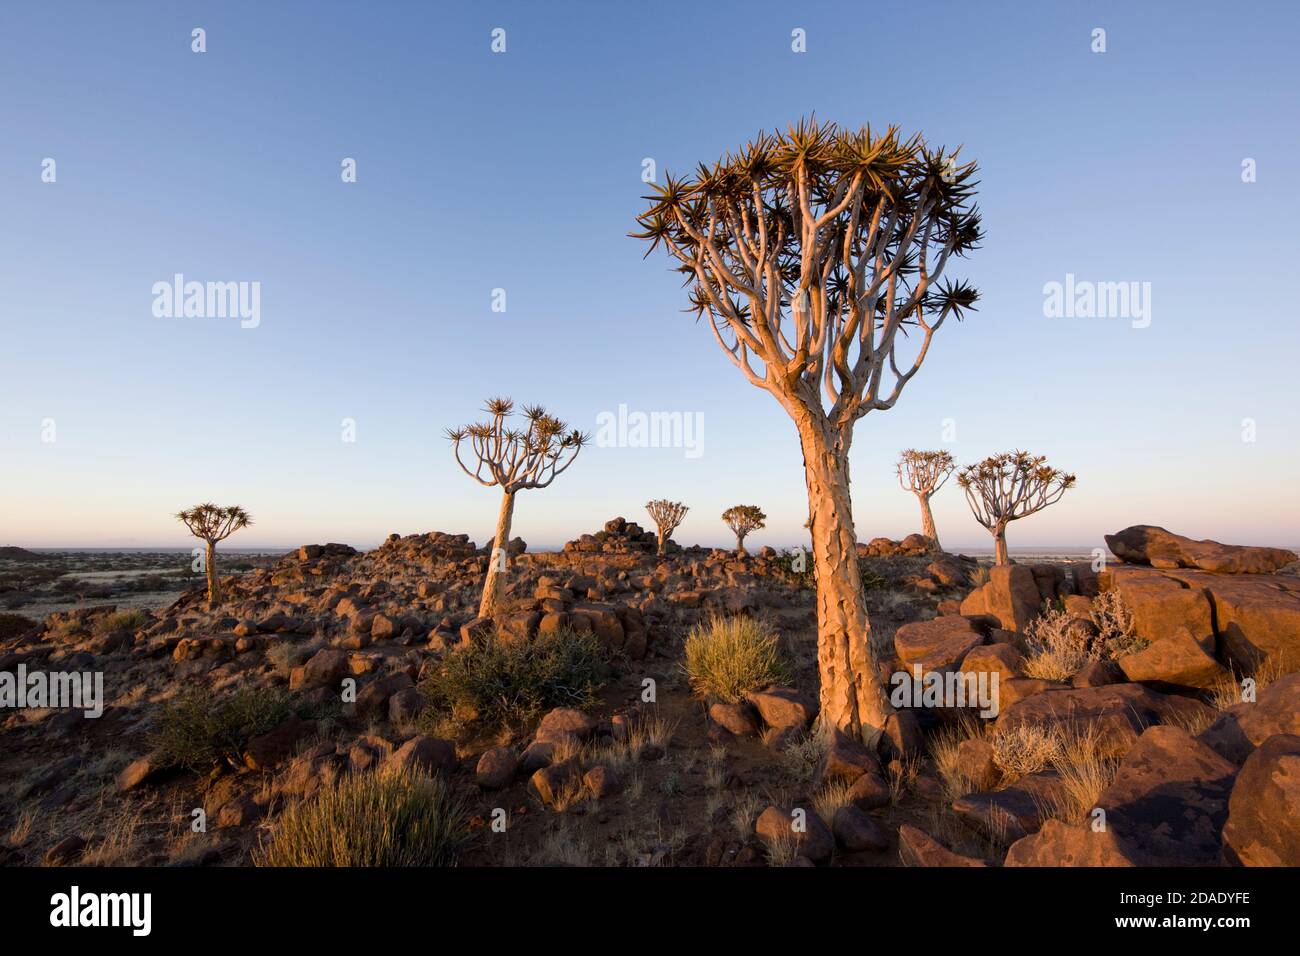 Geographie / Reisen, Namibia, Keetmanshoop, Köcher Tree Forest, Additional-Rights-Clearance-Info-not-available Stockfoto